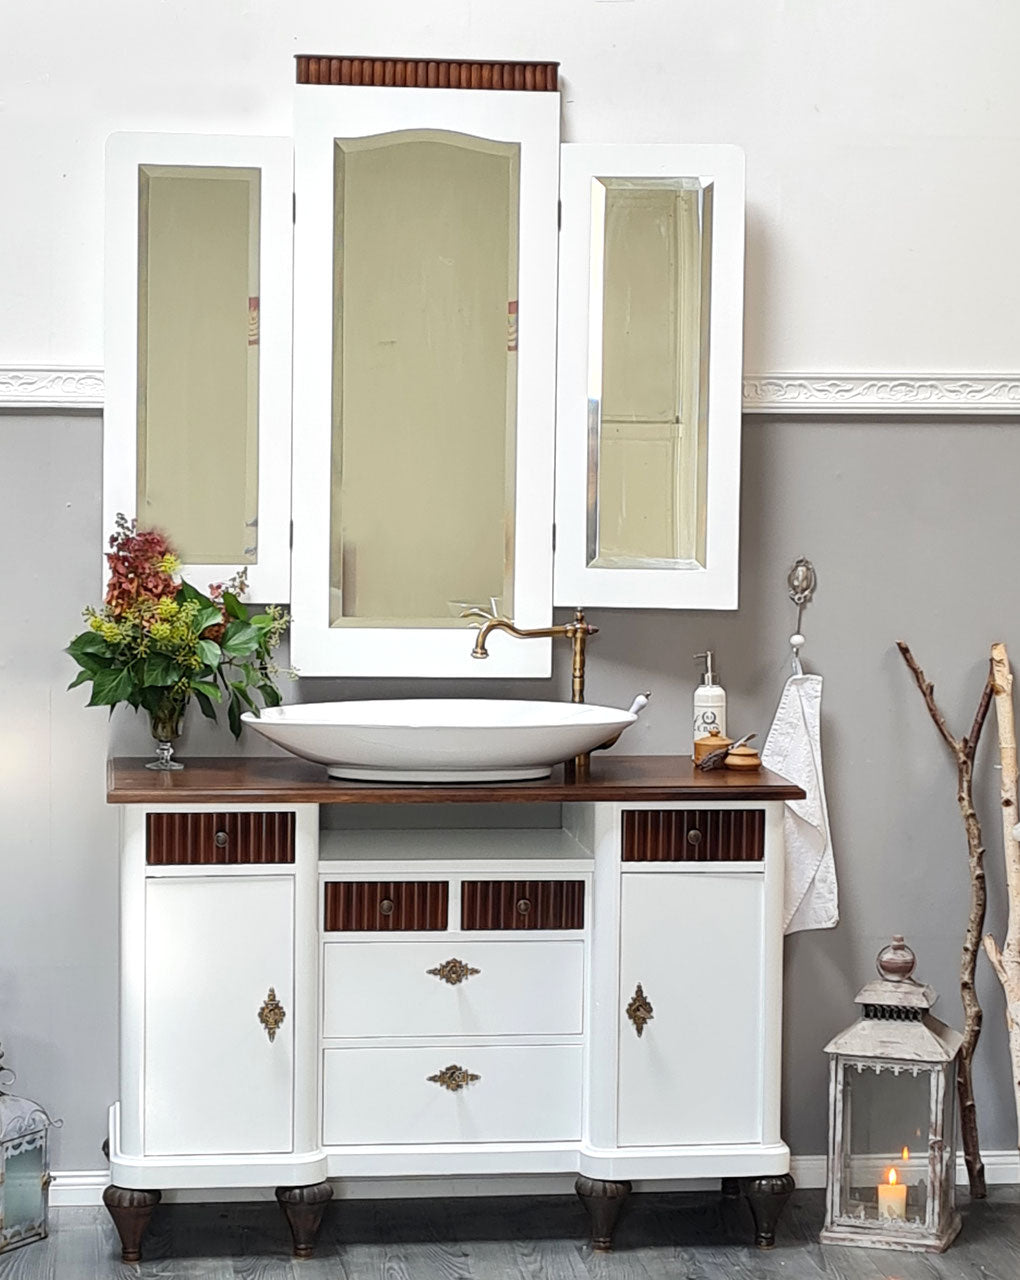 Mirror washbasins in country house style